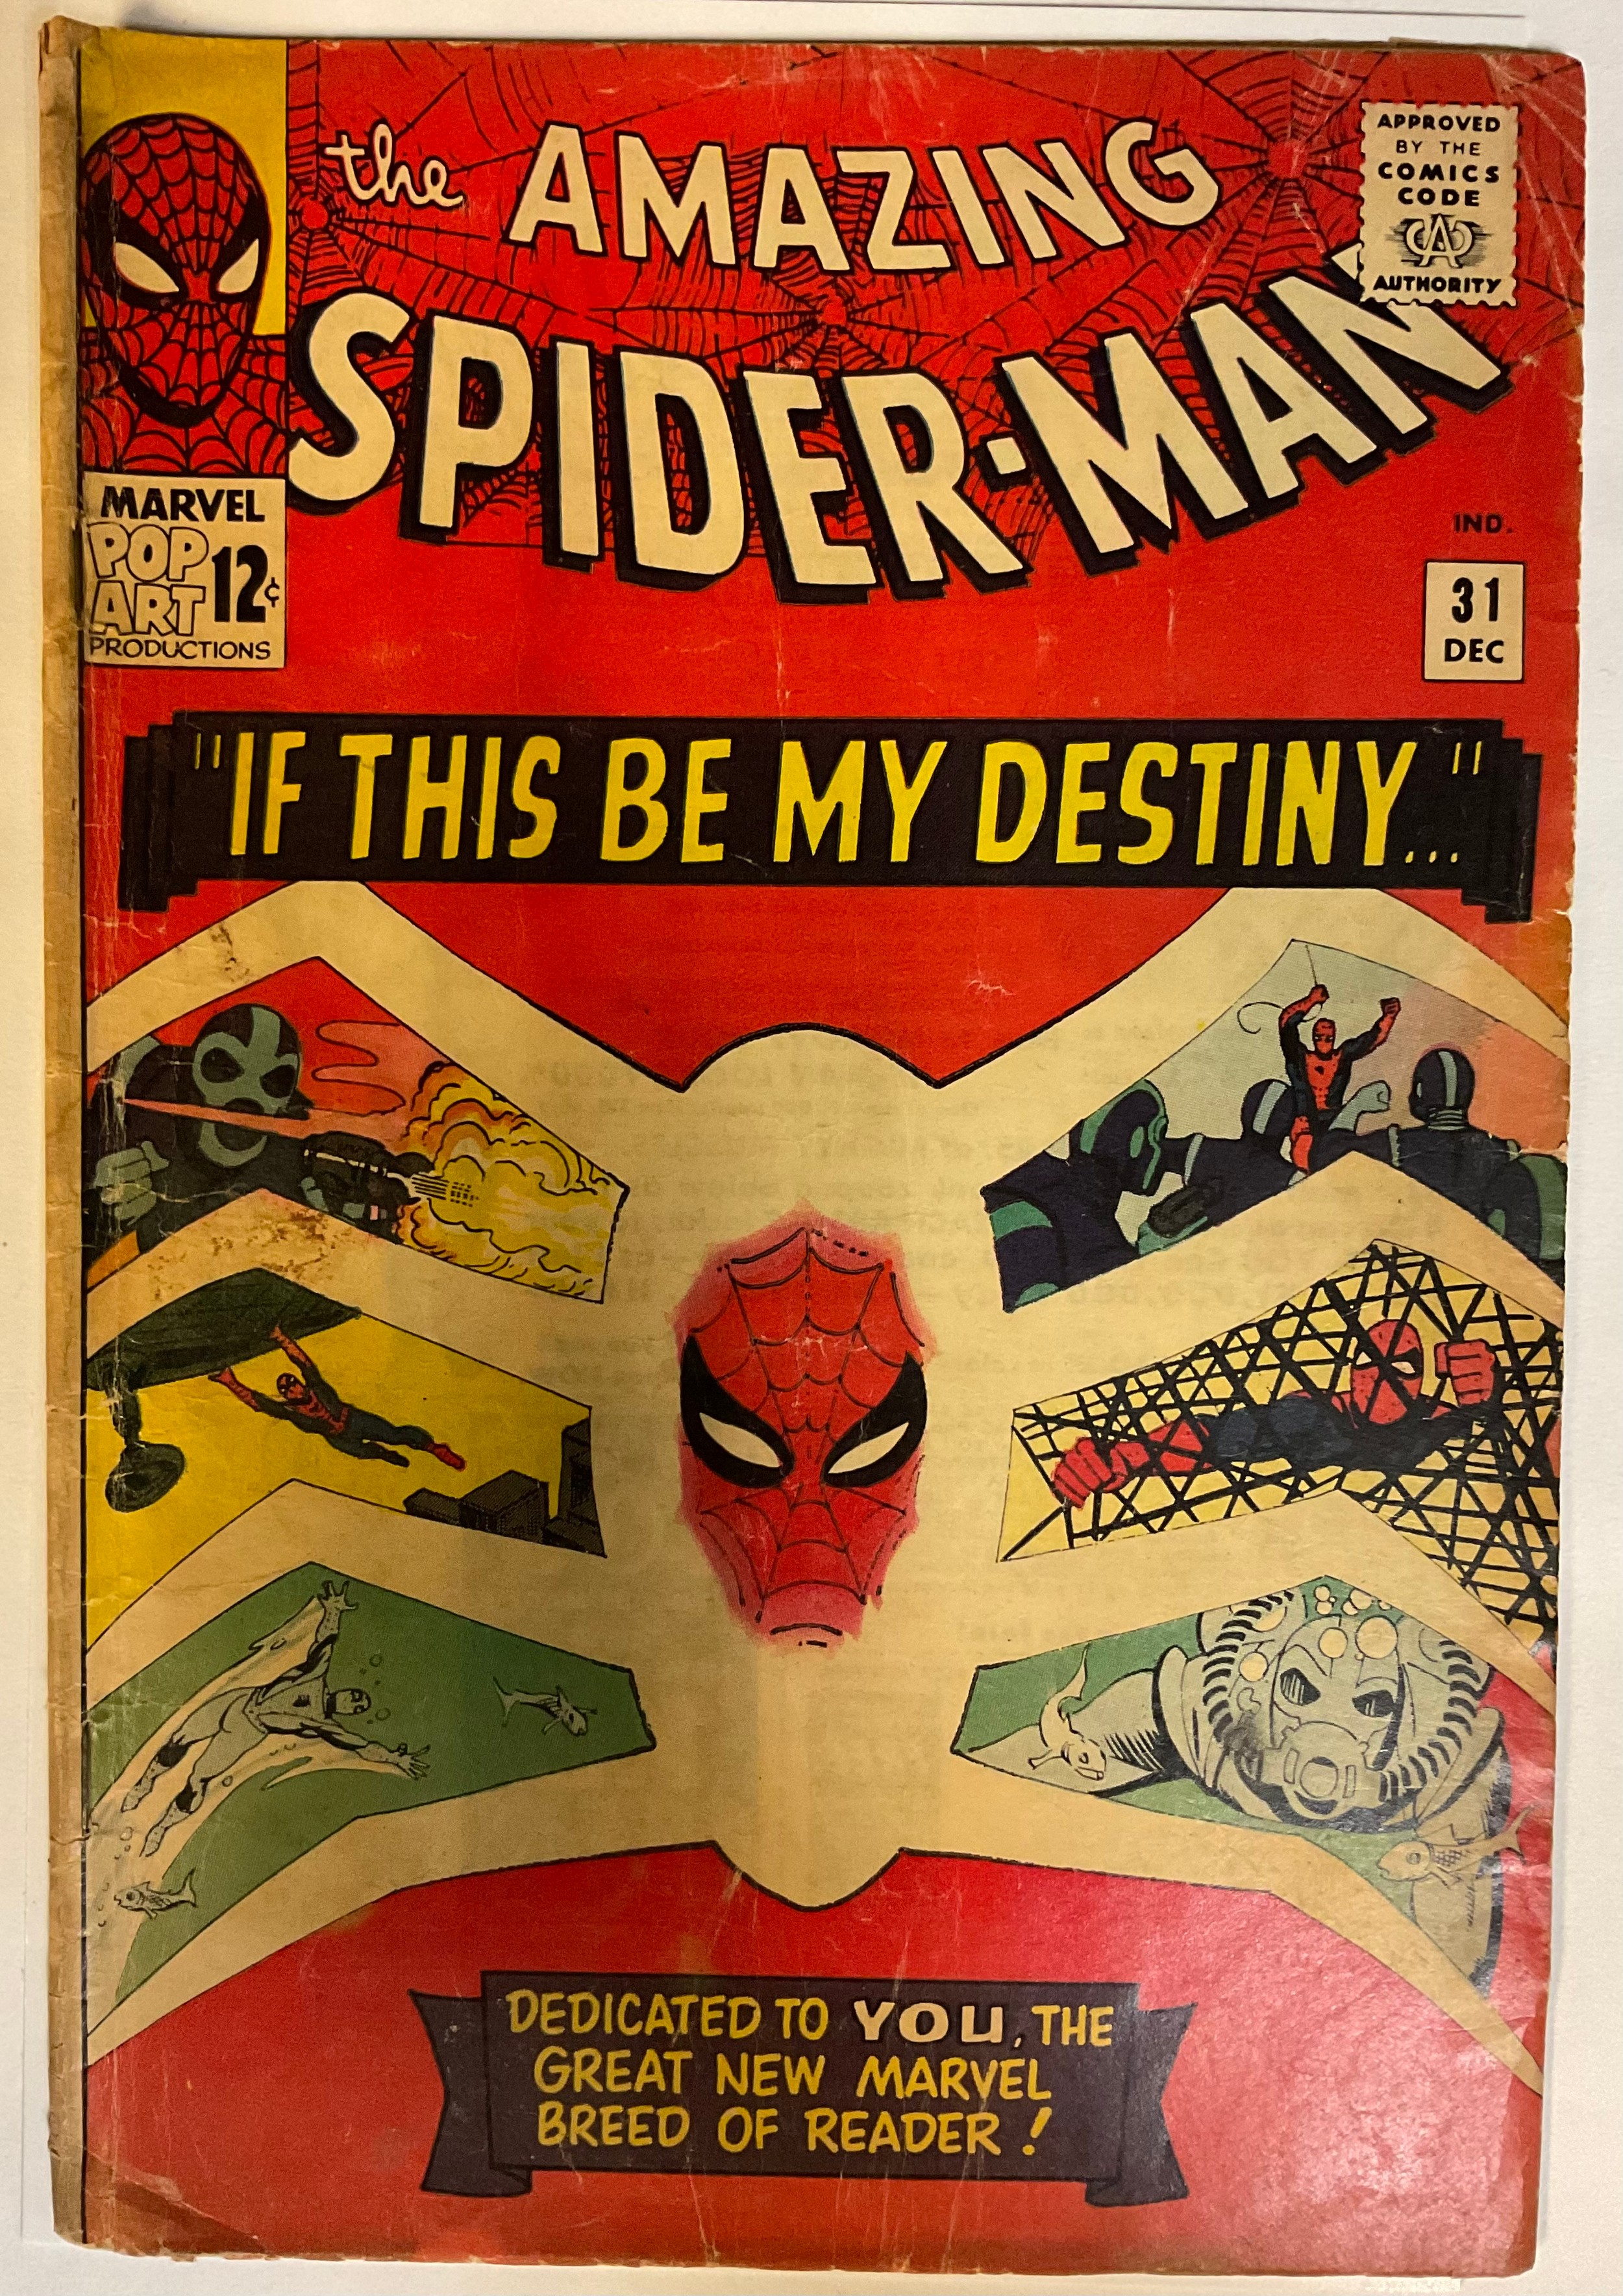 The Amazing Spider-man #31 (1965). Low grade. Written by Stan Lee, art by Steve Ditko. 1st